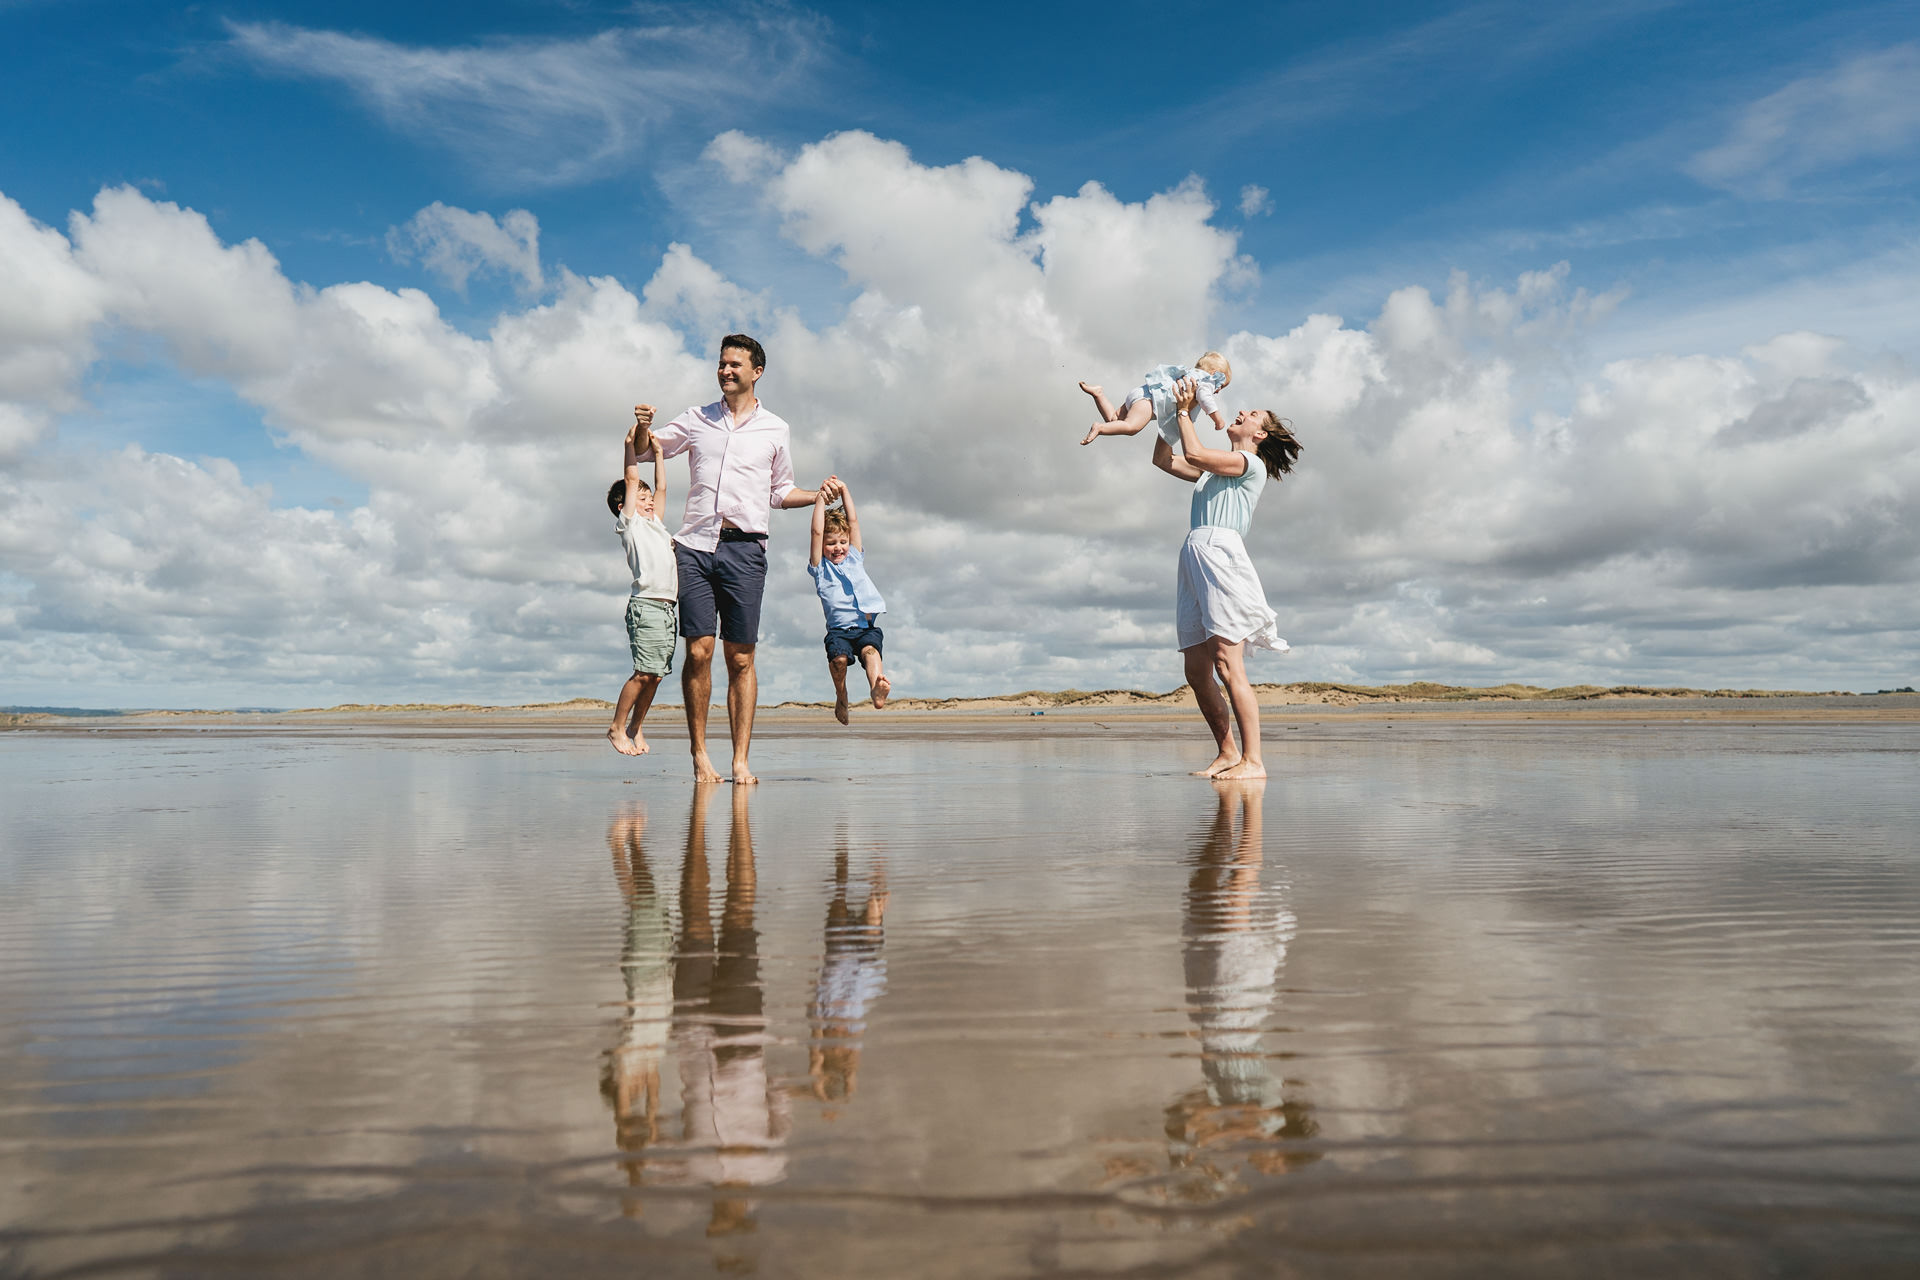 A mother and father with three young children, swinging them in the air on a beach, with blue skies above reflected in wet sand